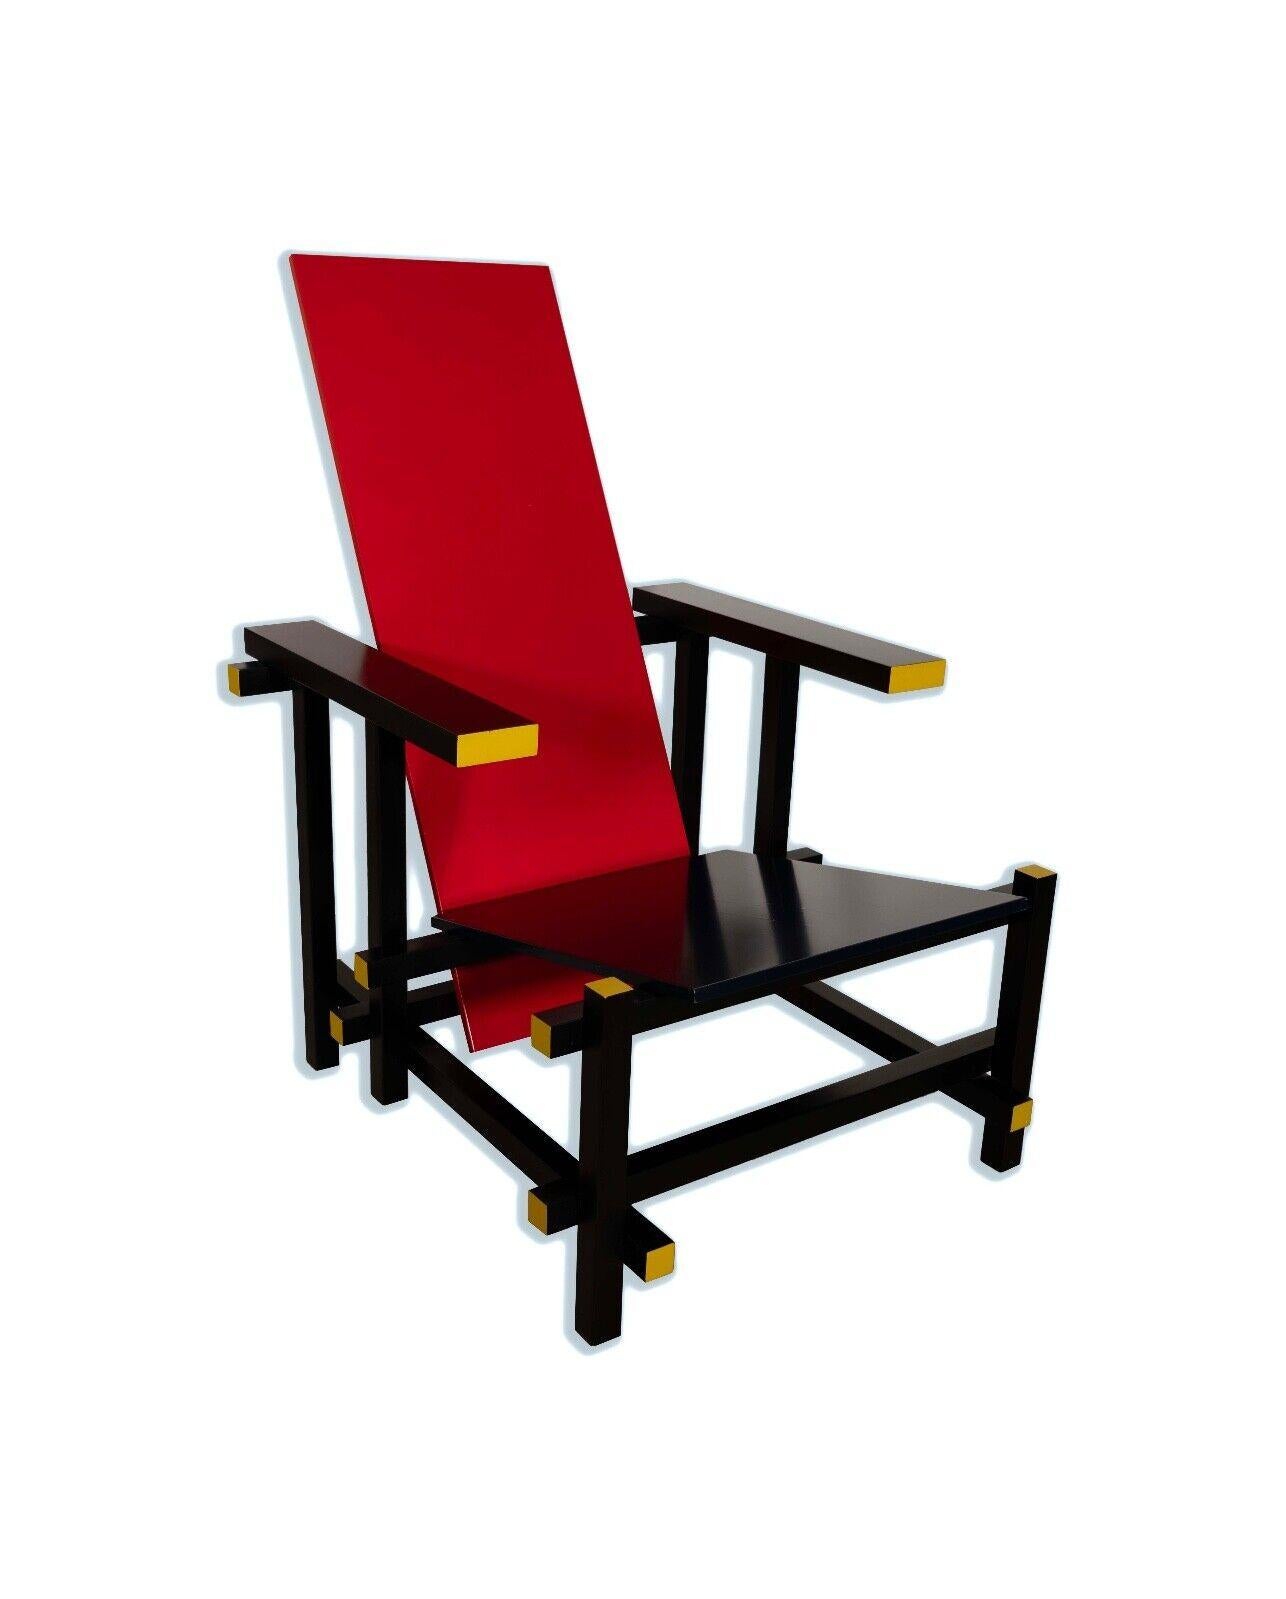 Bold and artistic, the Cassina Red, Blue, and Yellow Chair is a striking piece of mid-century modern design by Gerrit Thomas Rietveld. Its geometric form and primary color scheme reflect the De Stijl art movement's influence on Rietveld's work. The